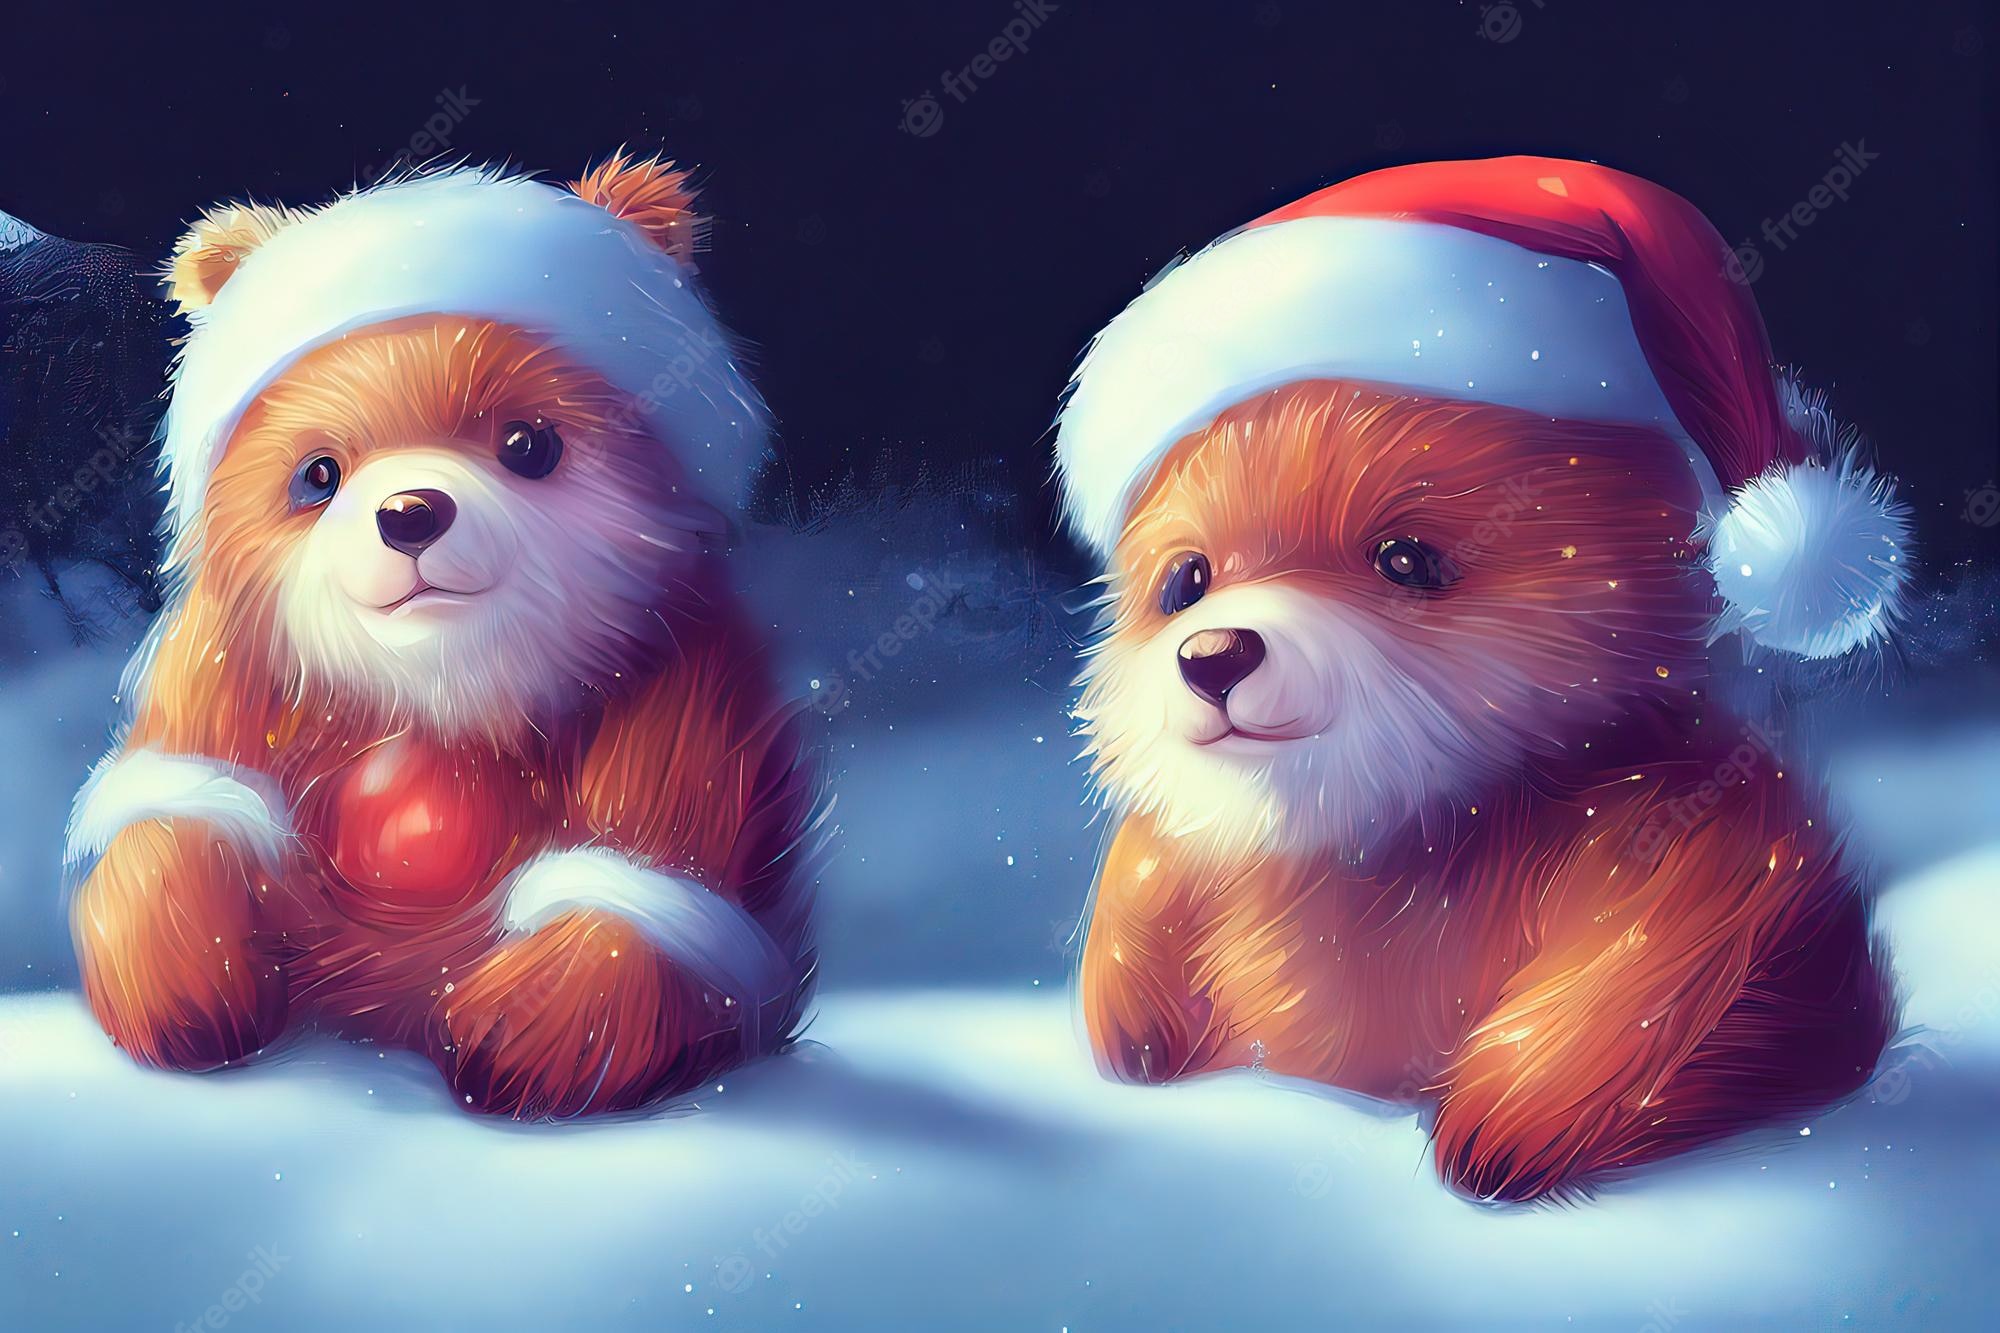 Premium Photo. Cute bear in winter forest adorable little bear in christmas style christmas holidays background digital art style illustration painting